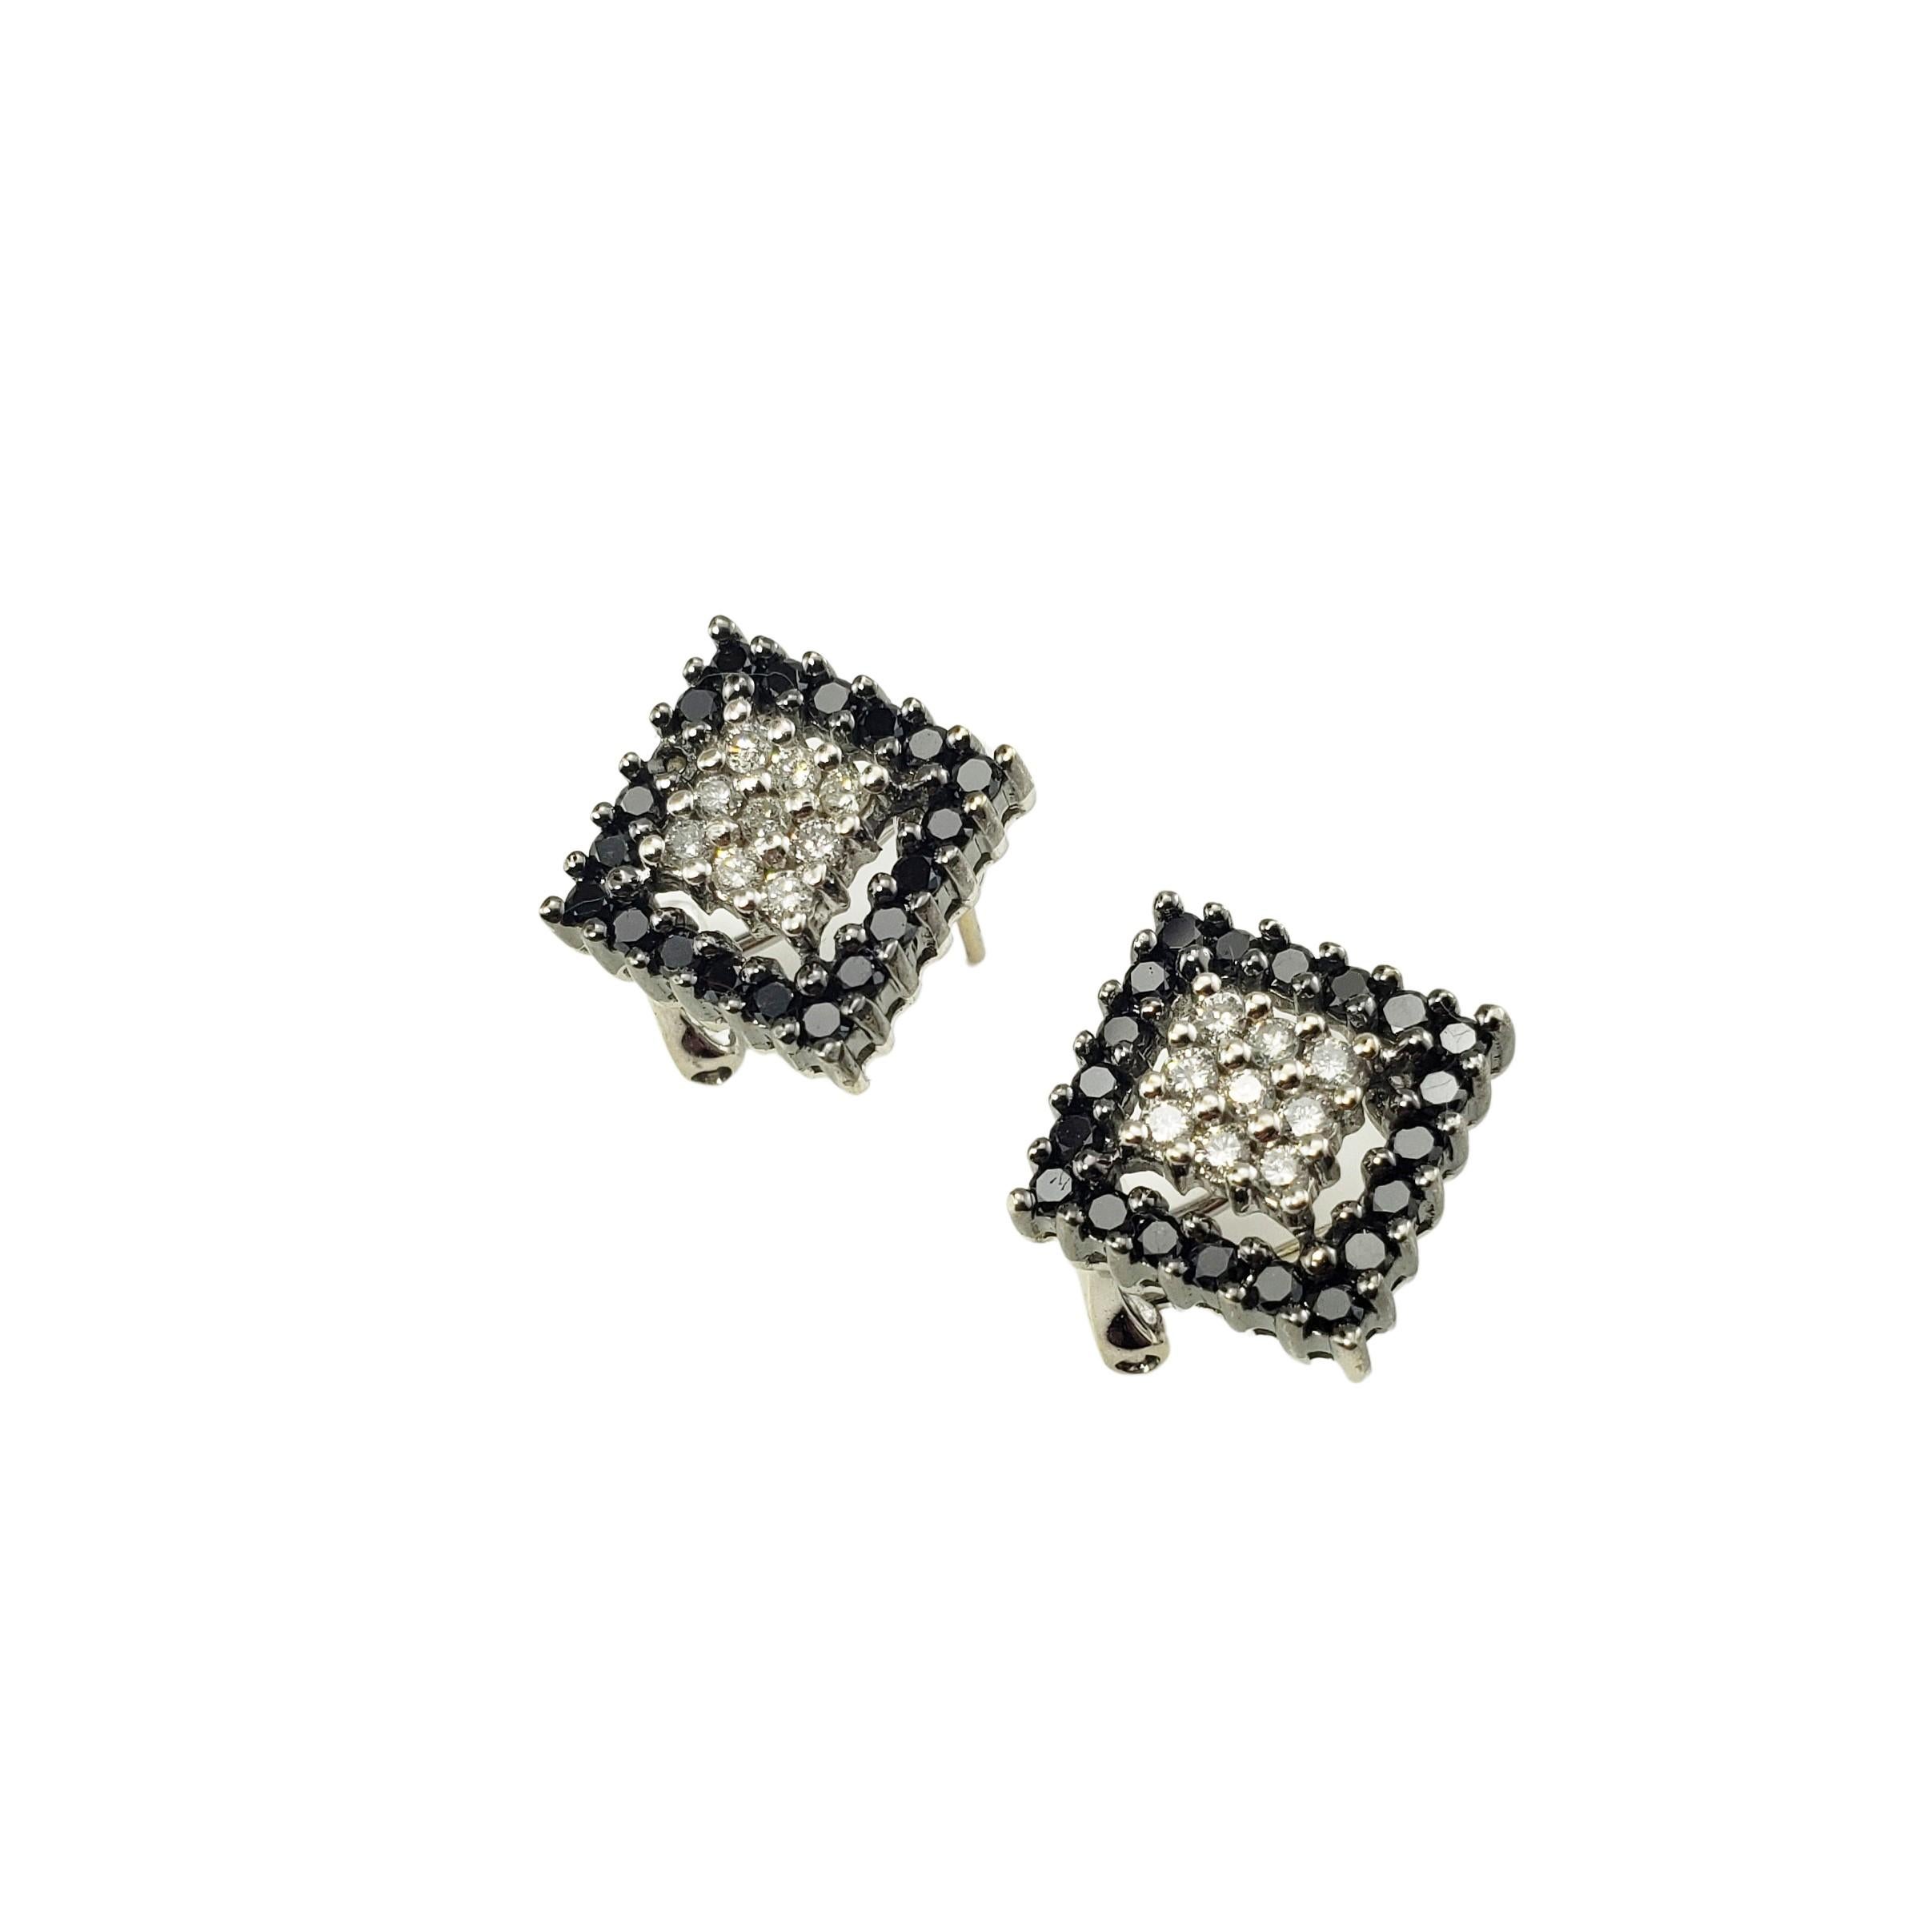 14 Karat White Gold Black and White Diamond Earrings-

These sparkling earrings each features nine white brilliant cut diamonds and 11 black brilliant diamonds set in beautifully detailed 14K white gold.  Hinged closures.

Approximate total diamond